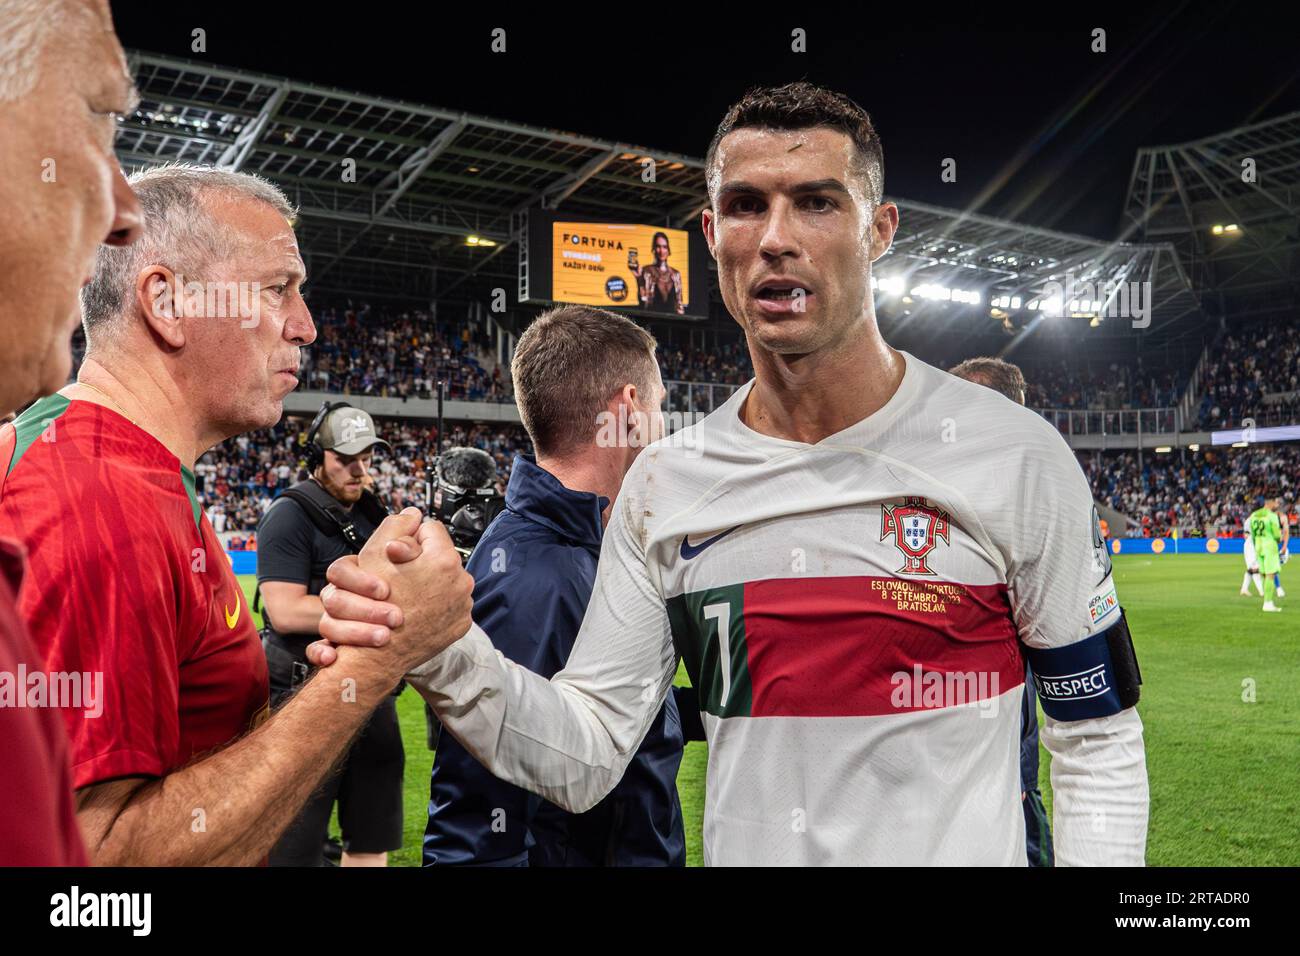 Cristiano Ronaldo seen after the European Qualifier match between Slovakia and Portugal which took place in Bratislava. Portugal won the match 1:0 and remained unbeaten on top of Group J. The only goal was scored by Bruno Fernandes. Cristiano Ronaldo received his third yellow card and he missed next match. Stock Photo